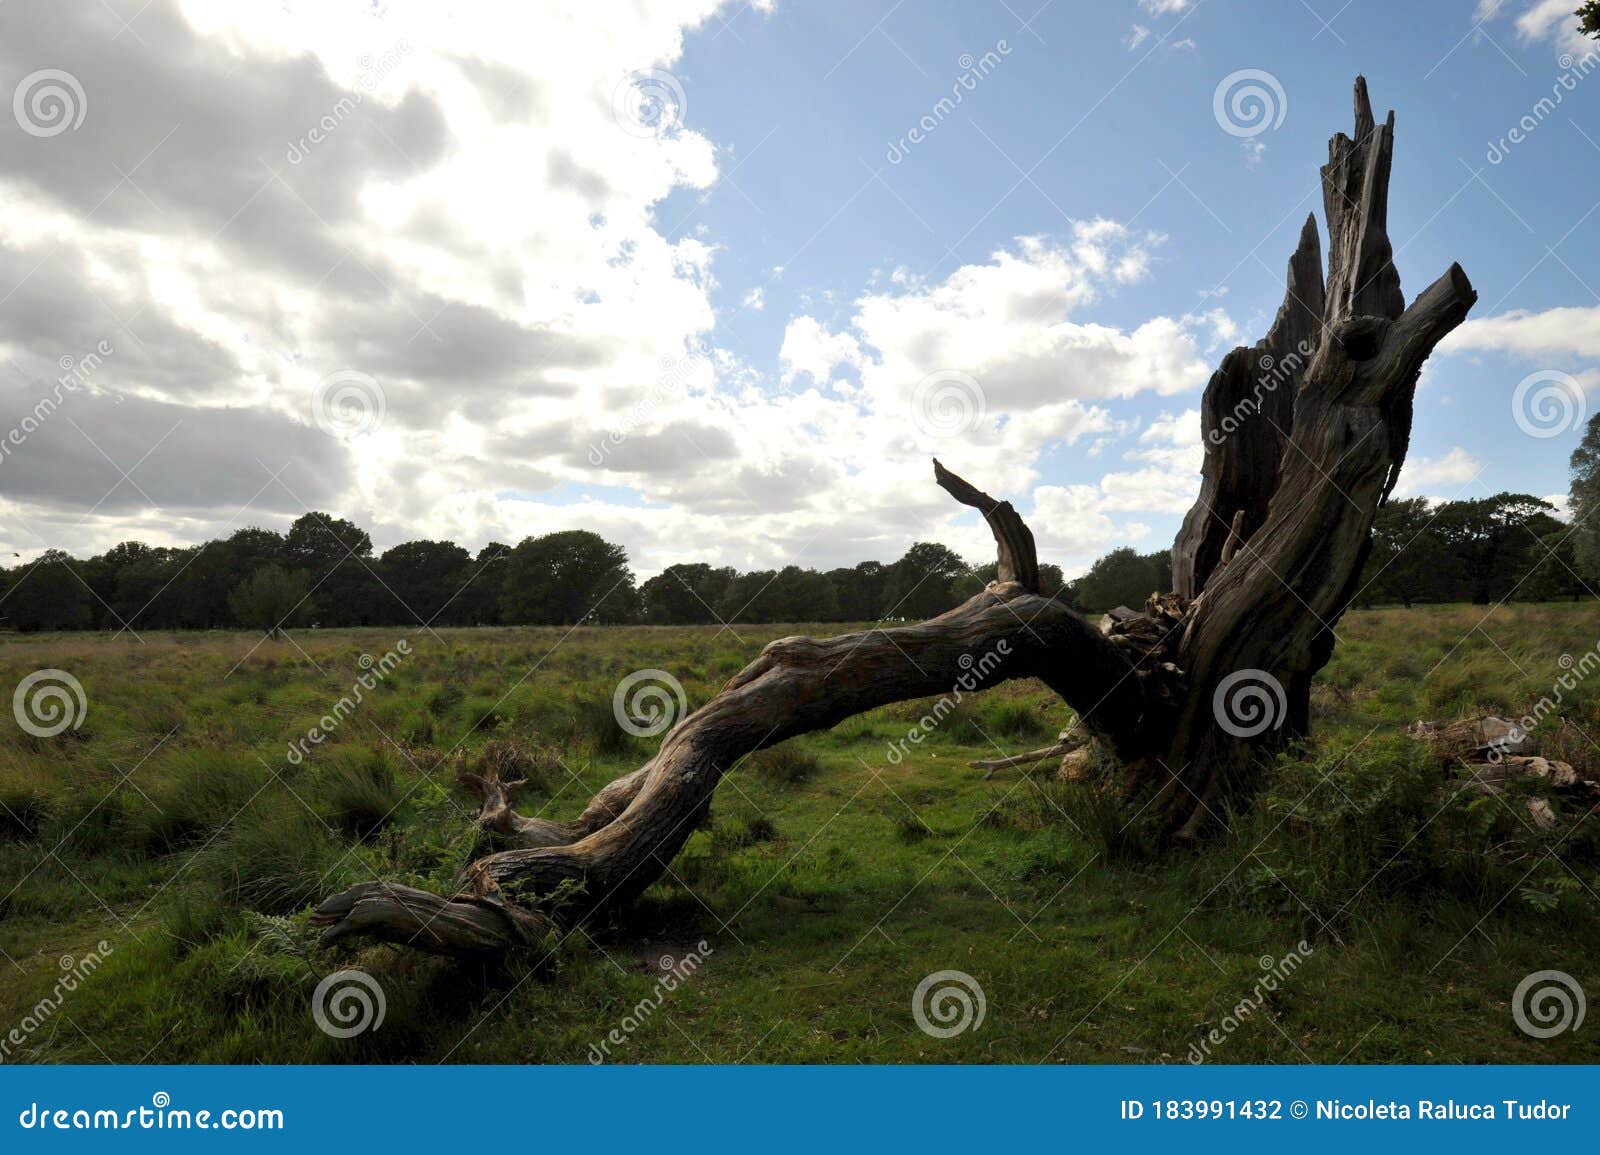 Broken Conceptual Image with Dead Tree and Young Healthy Near it in Richmond Park London Stock Photo - of green, 183991432